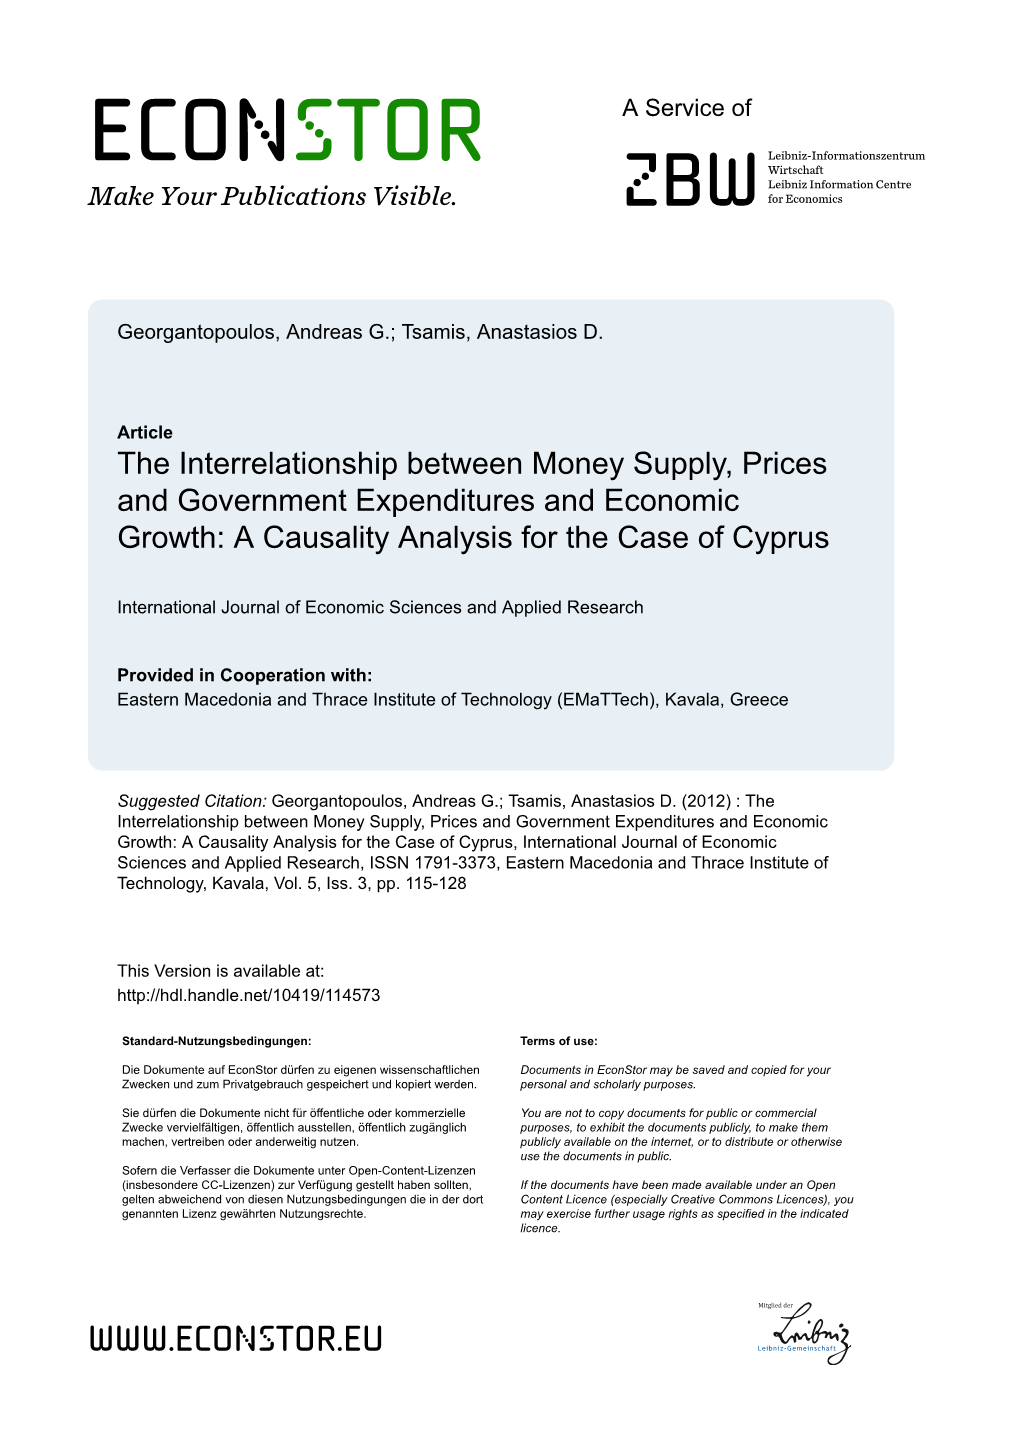 The Interrelationship Between Money Supply, Prices and Government Expenditures and Economic Growth: a Causality Analysis for the Case of Cyprus